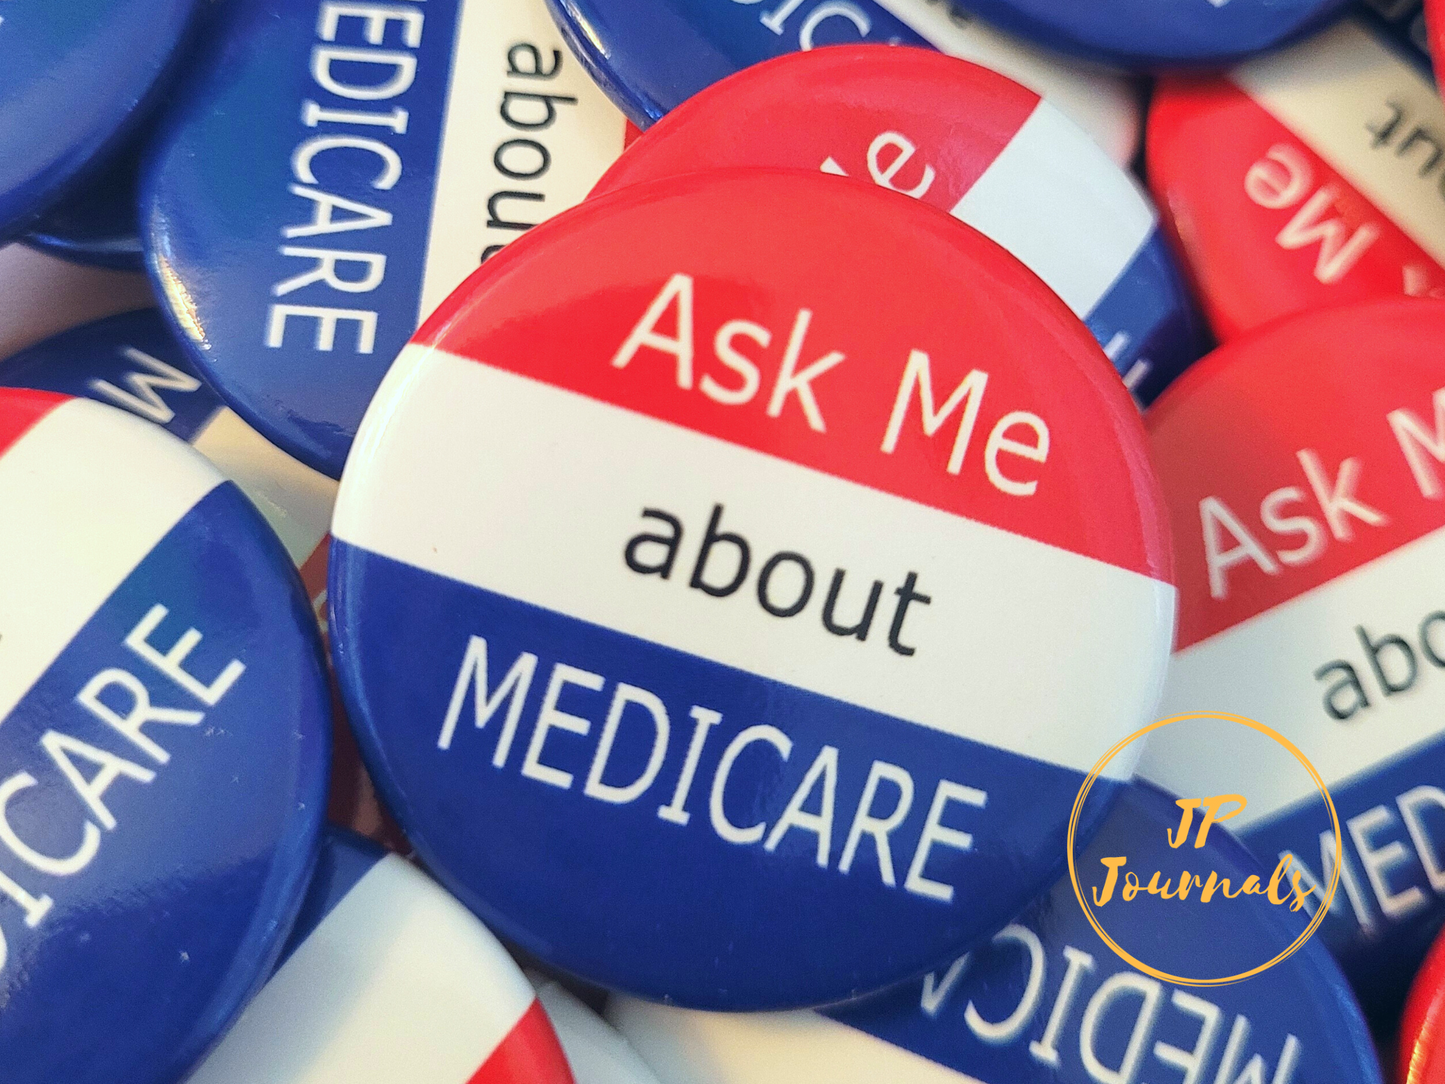 Ask Me About Medicare Marketing Pin 1.5 Inch